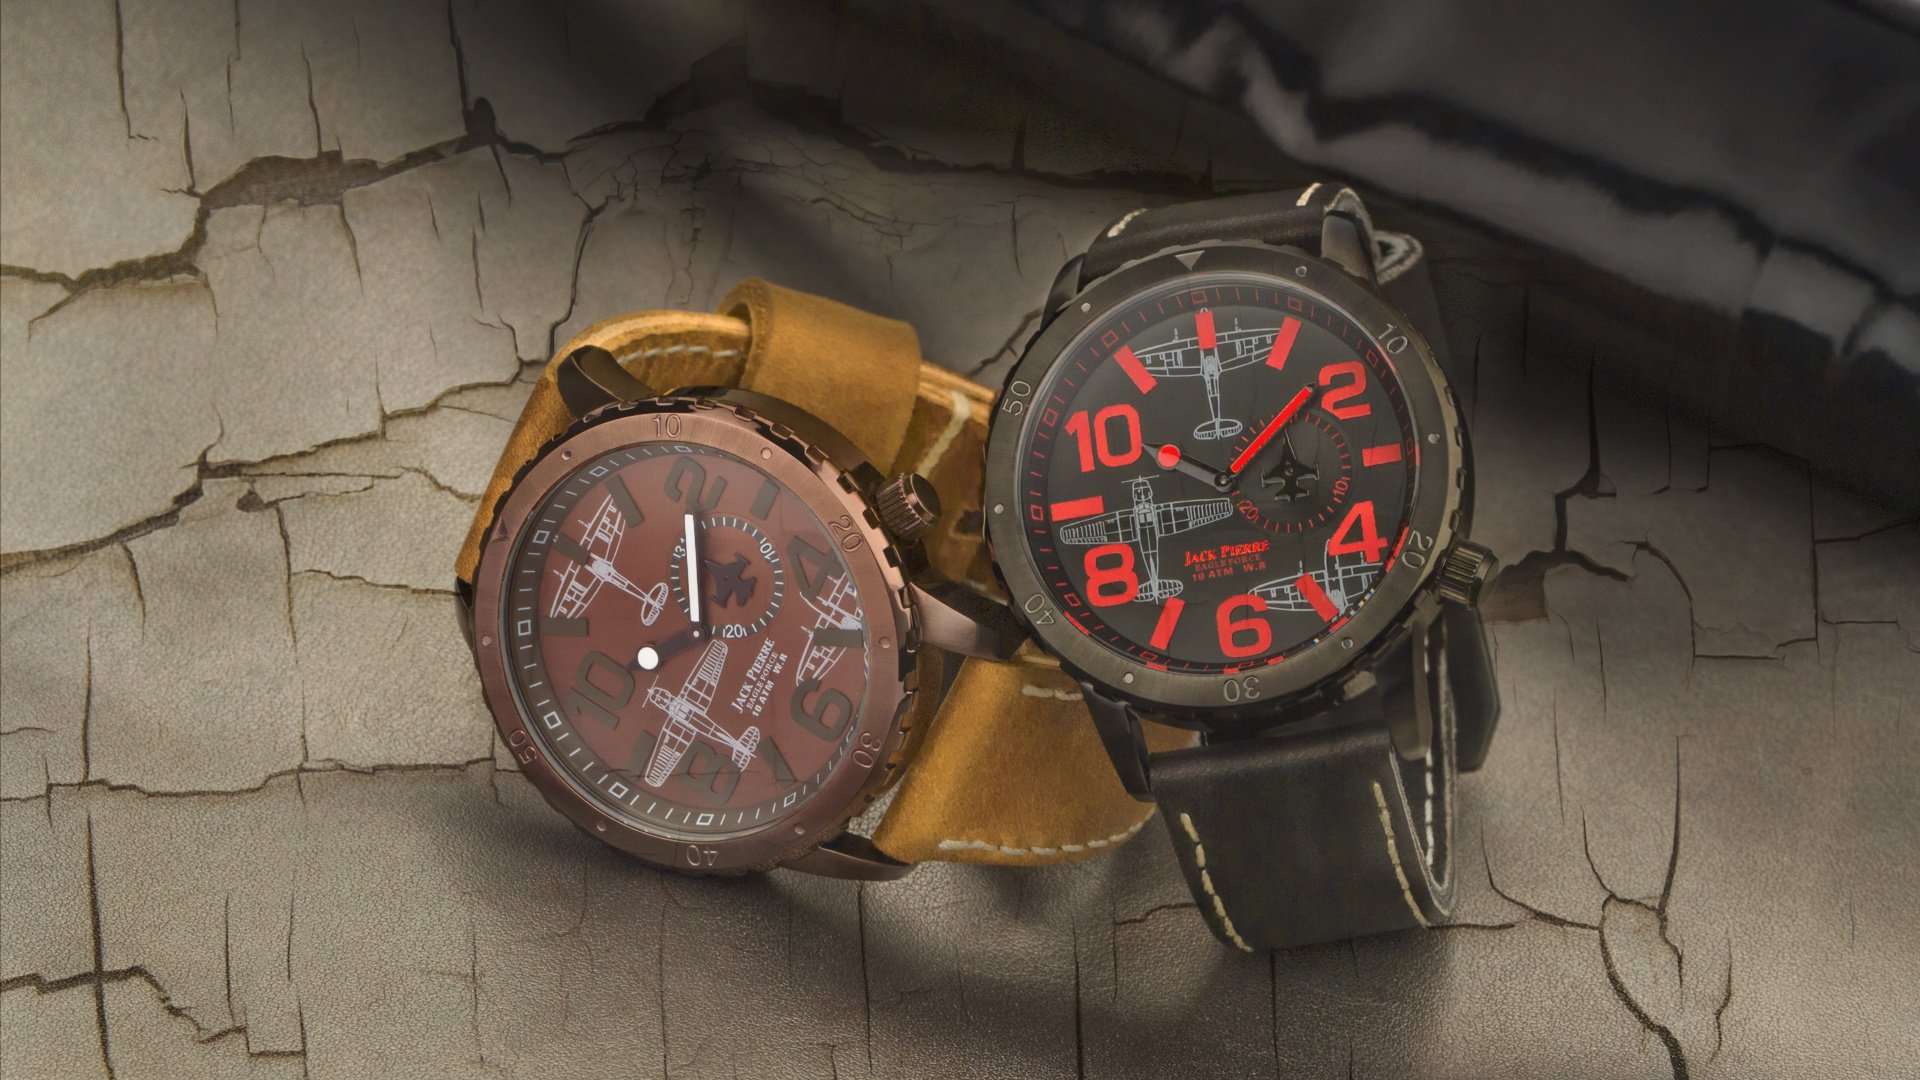 Two wristwatches are depicted on a beige background